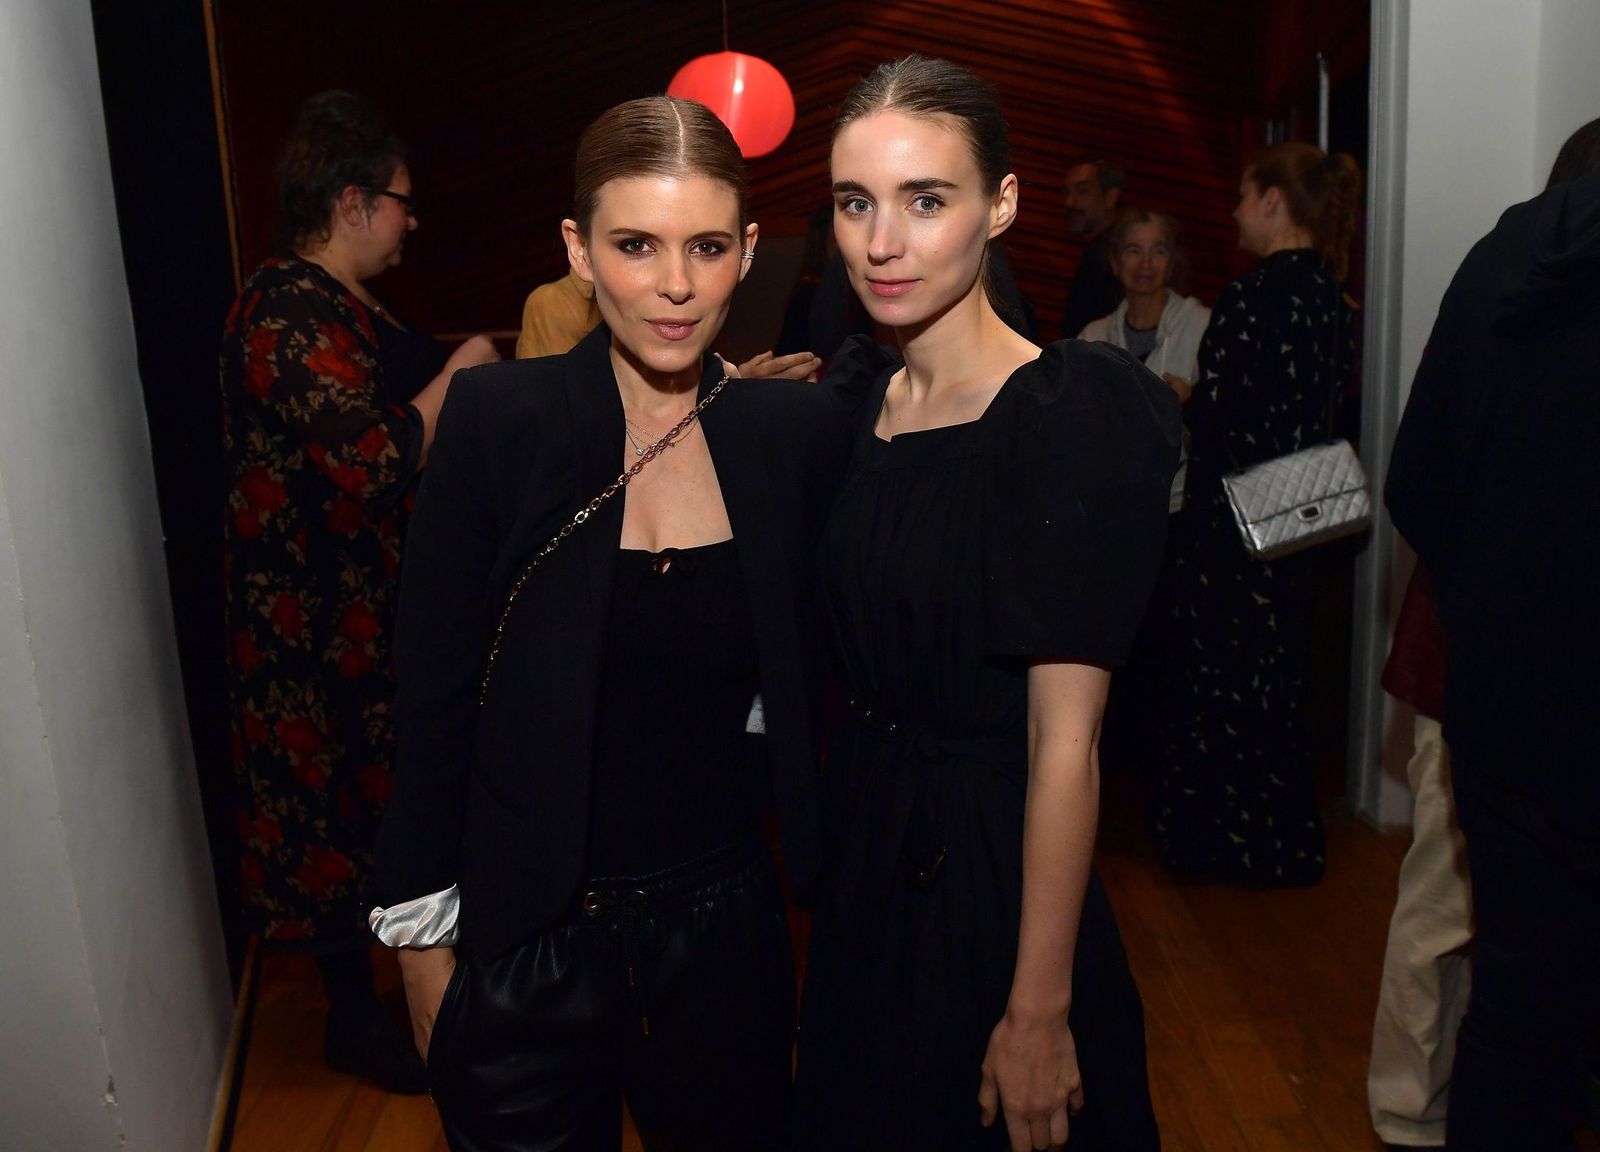 Kate Mara and Rooney Mara at the release party to celebrate Rain Phoenix's new album "RIVER", hosted by Joaquin Phoenix at Jim Henson Studios on October 28, 2019 | Photo: Getty Images